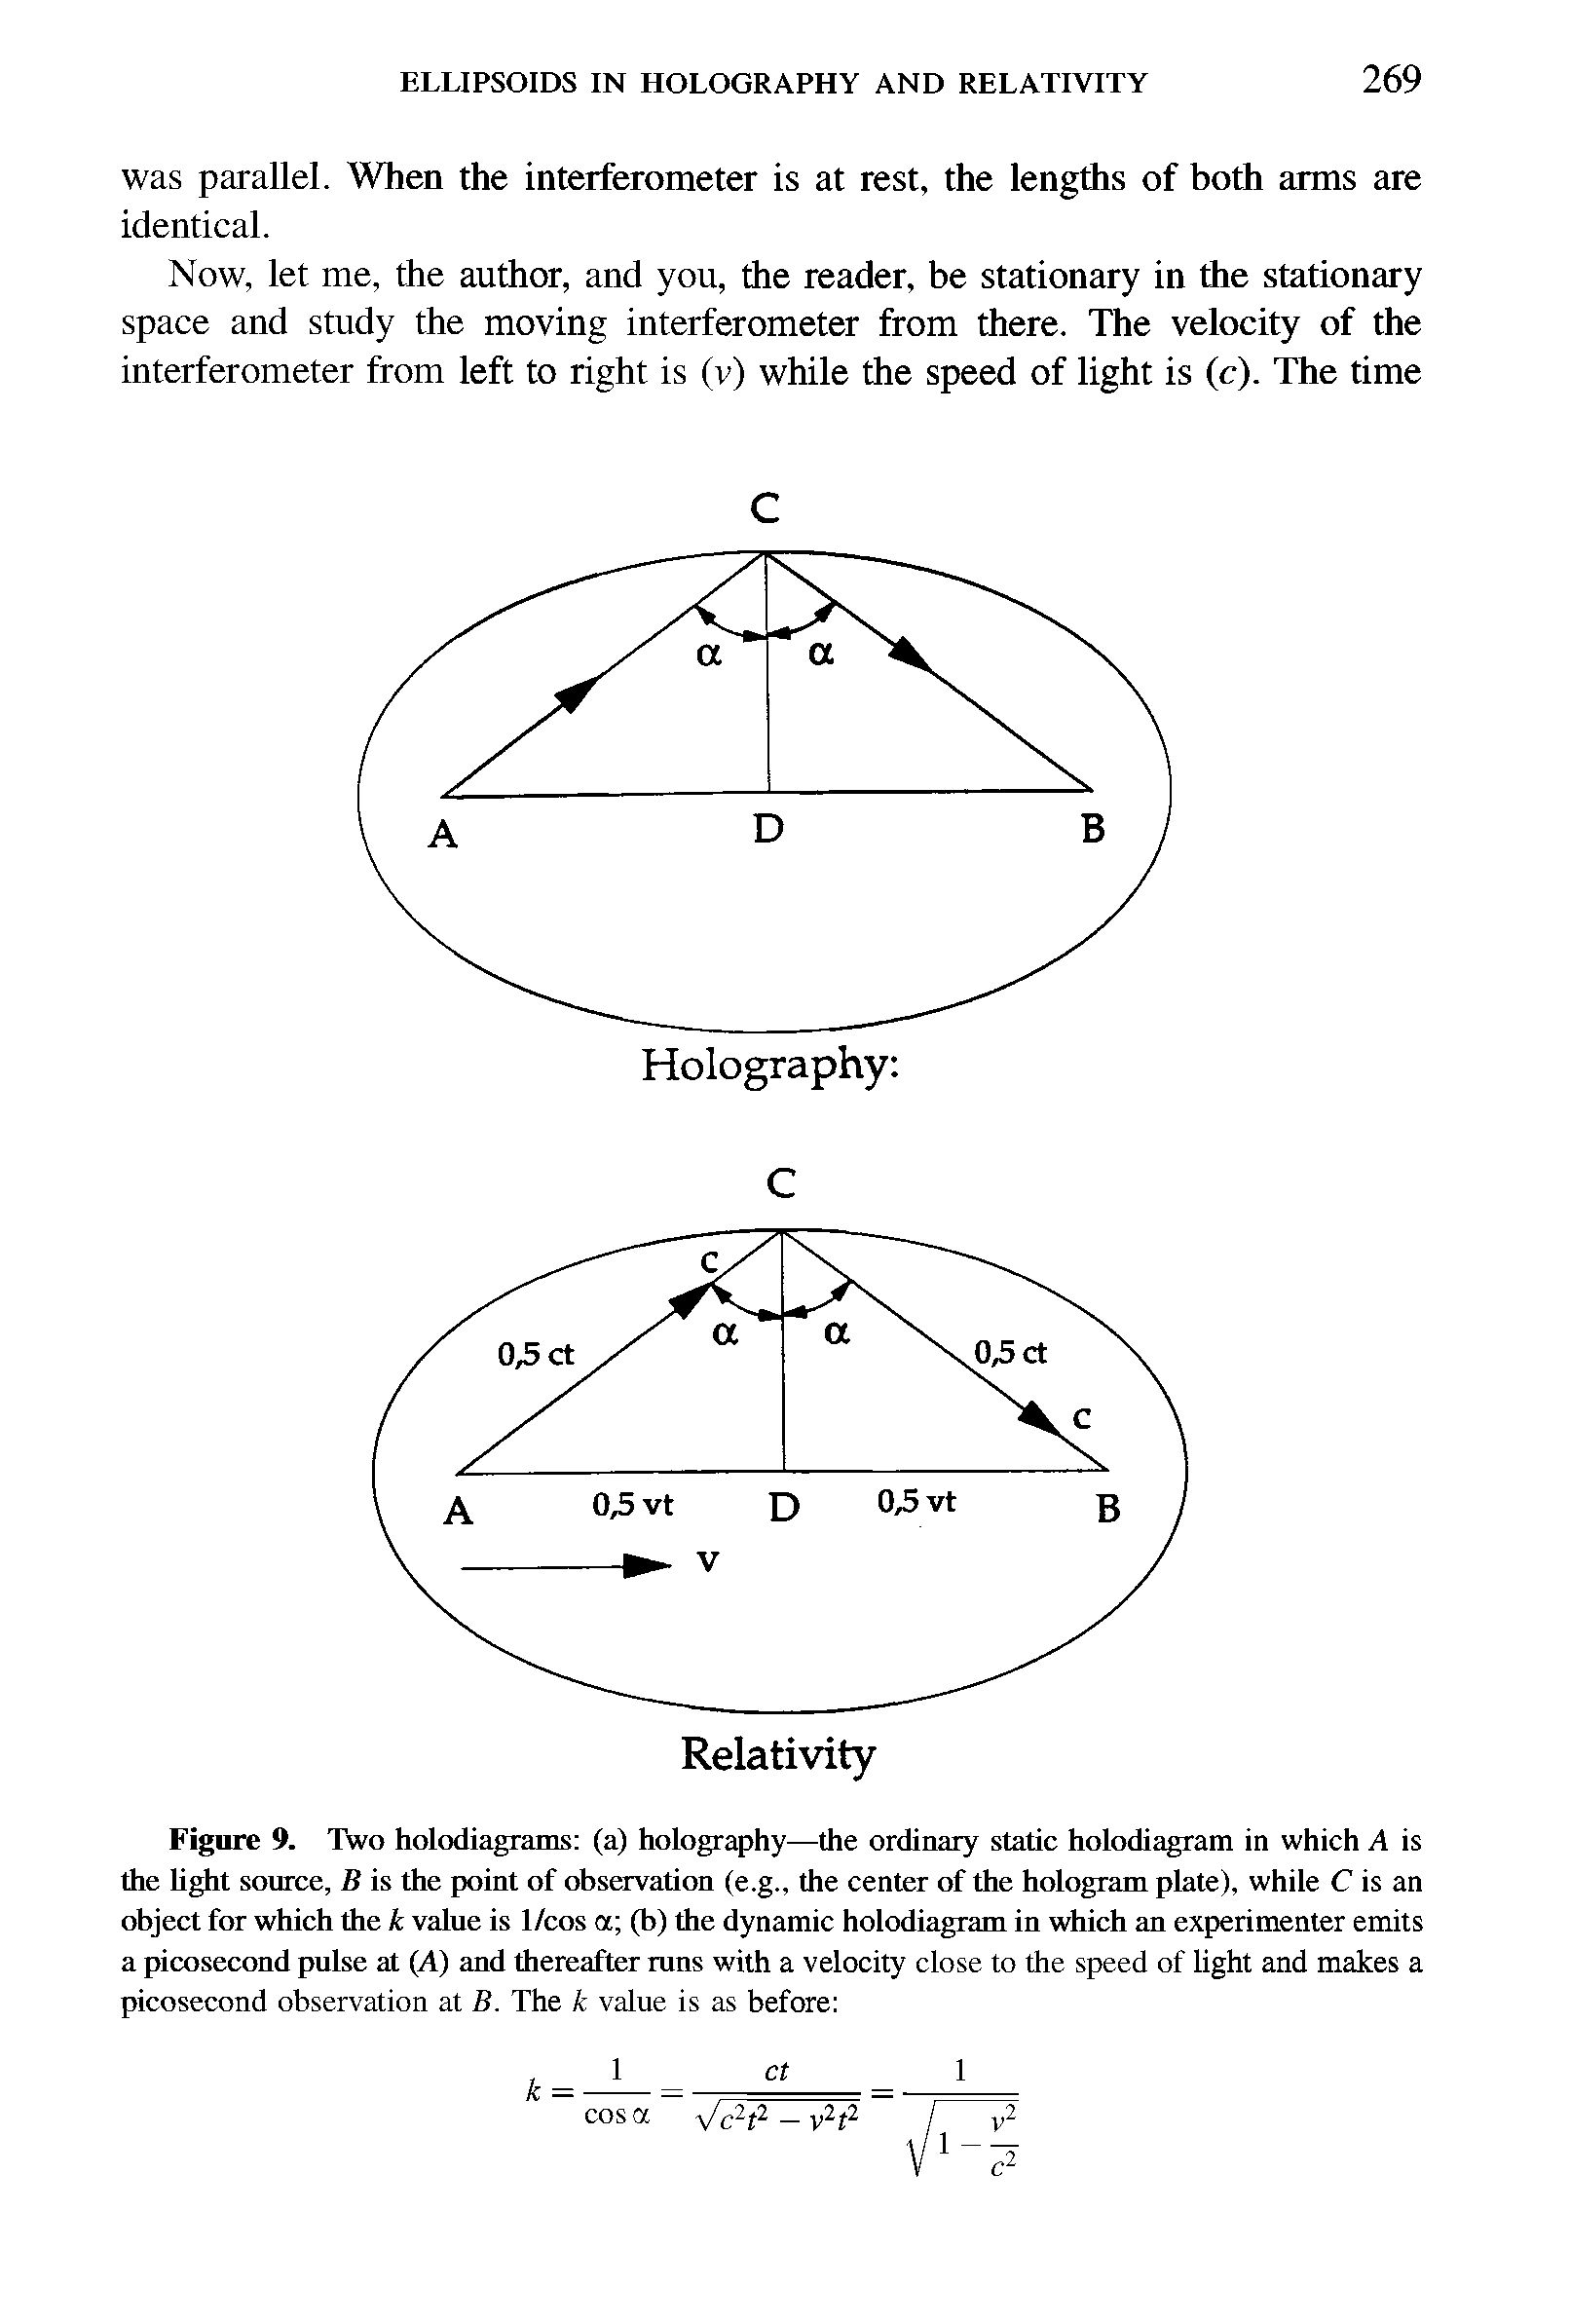 Figure 9. Two holodiagrams (a) holography—the ordinary static holodiagram in which A is the light source, B is the point of observation (e.g., the center of the hologram plate), while C is an object for which the k value is 1/cos a (b) the dynamic holodiagram in which an experimenter emits a picosecond pulse at (A) and thereafter runs with a velocity close to the speed of light and makes a picosecond observation at B. The k value is as before ...